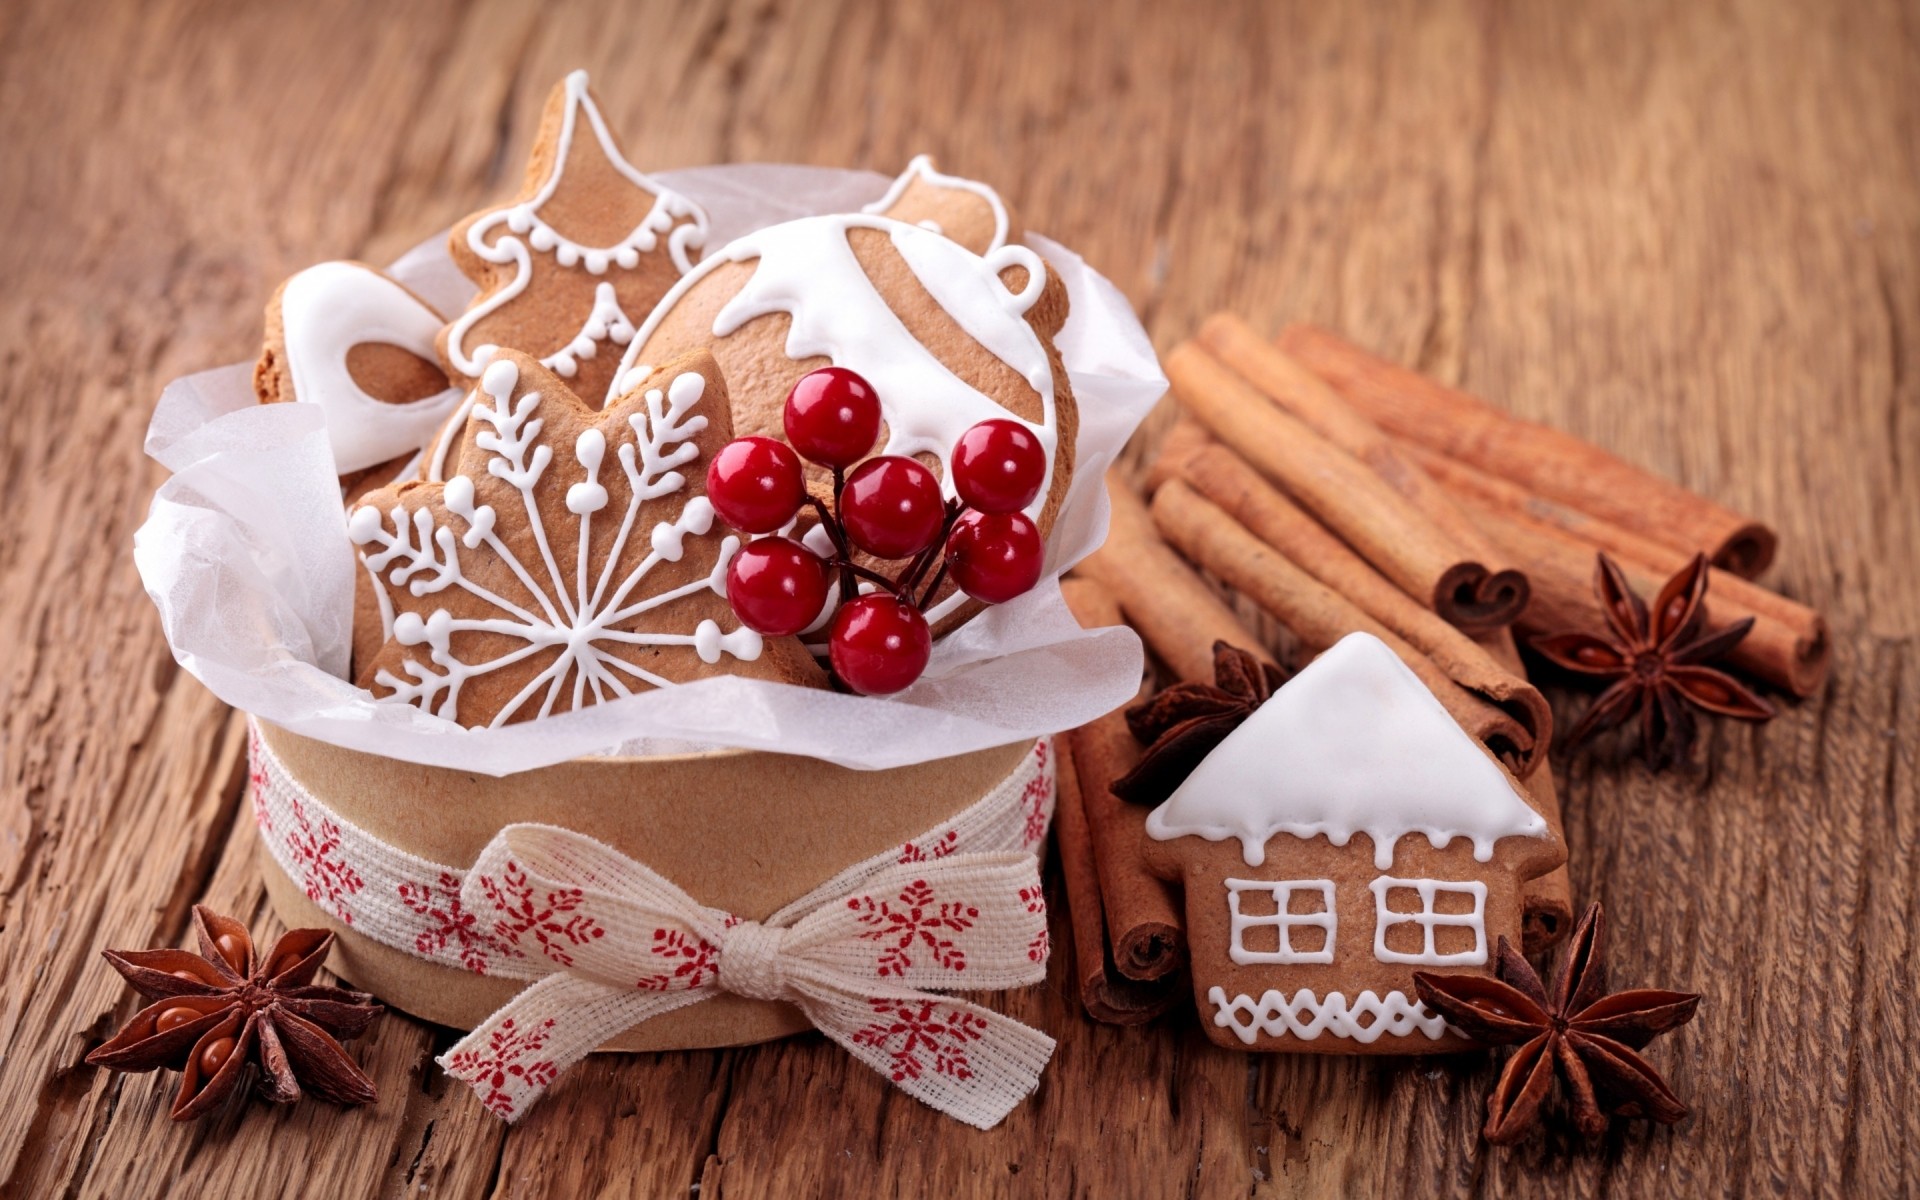 christmas cinnamon wooden wood anise food spice rustic traditional cookie gingerbread sweet star anise homemade aromatic table baking desktop advent sweets dessert christmas ornaments